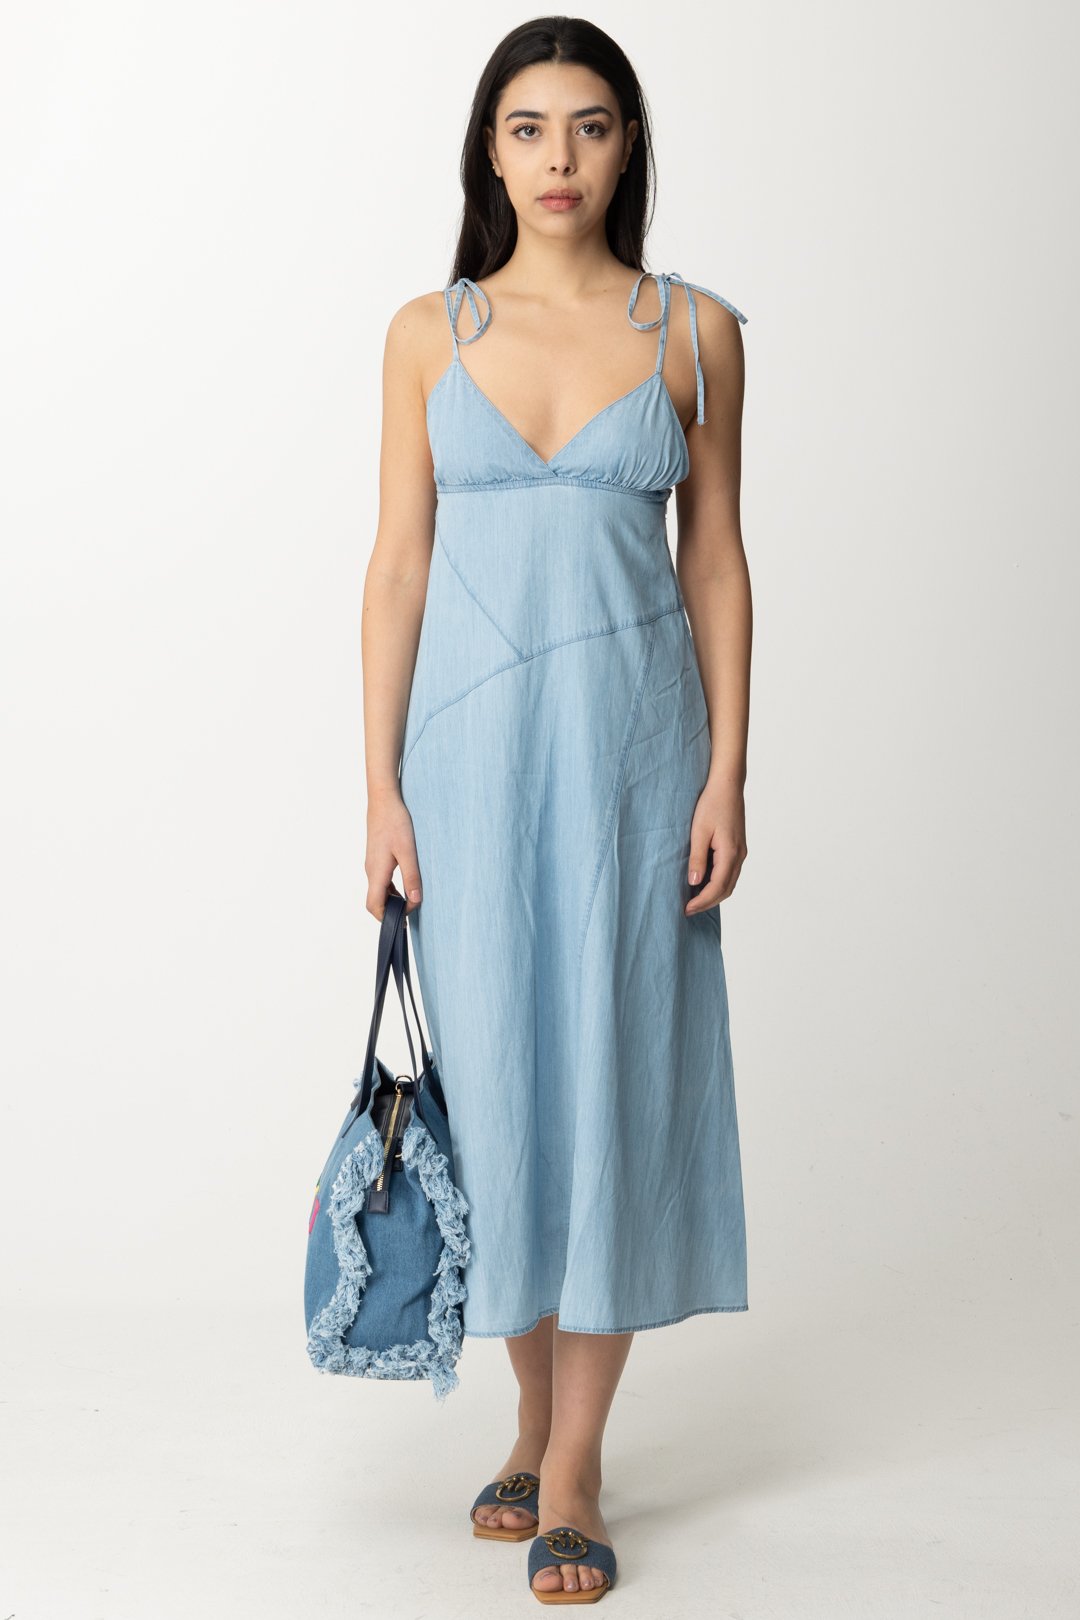 Preview: Replay Denim Dress with Lace-Up Suspenders Light blue